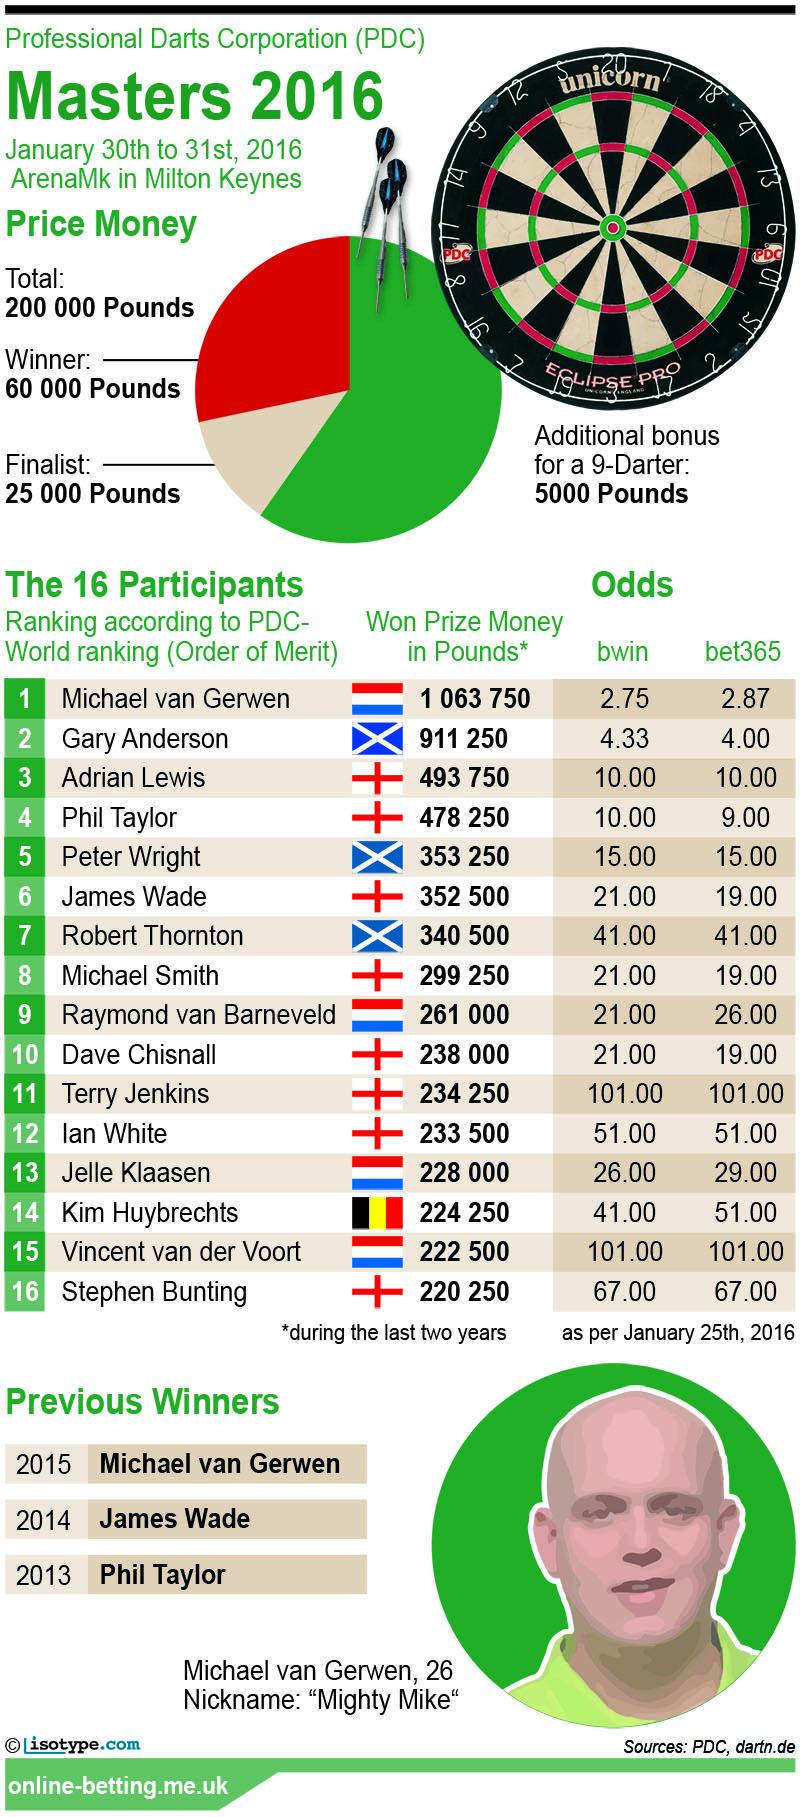 PDC Darts Masters 2016